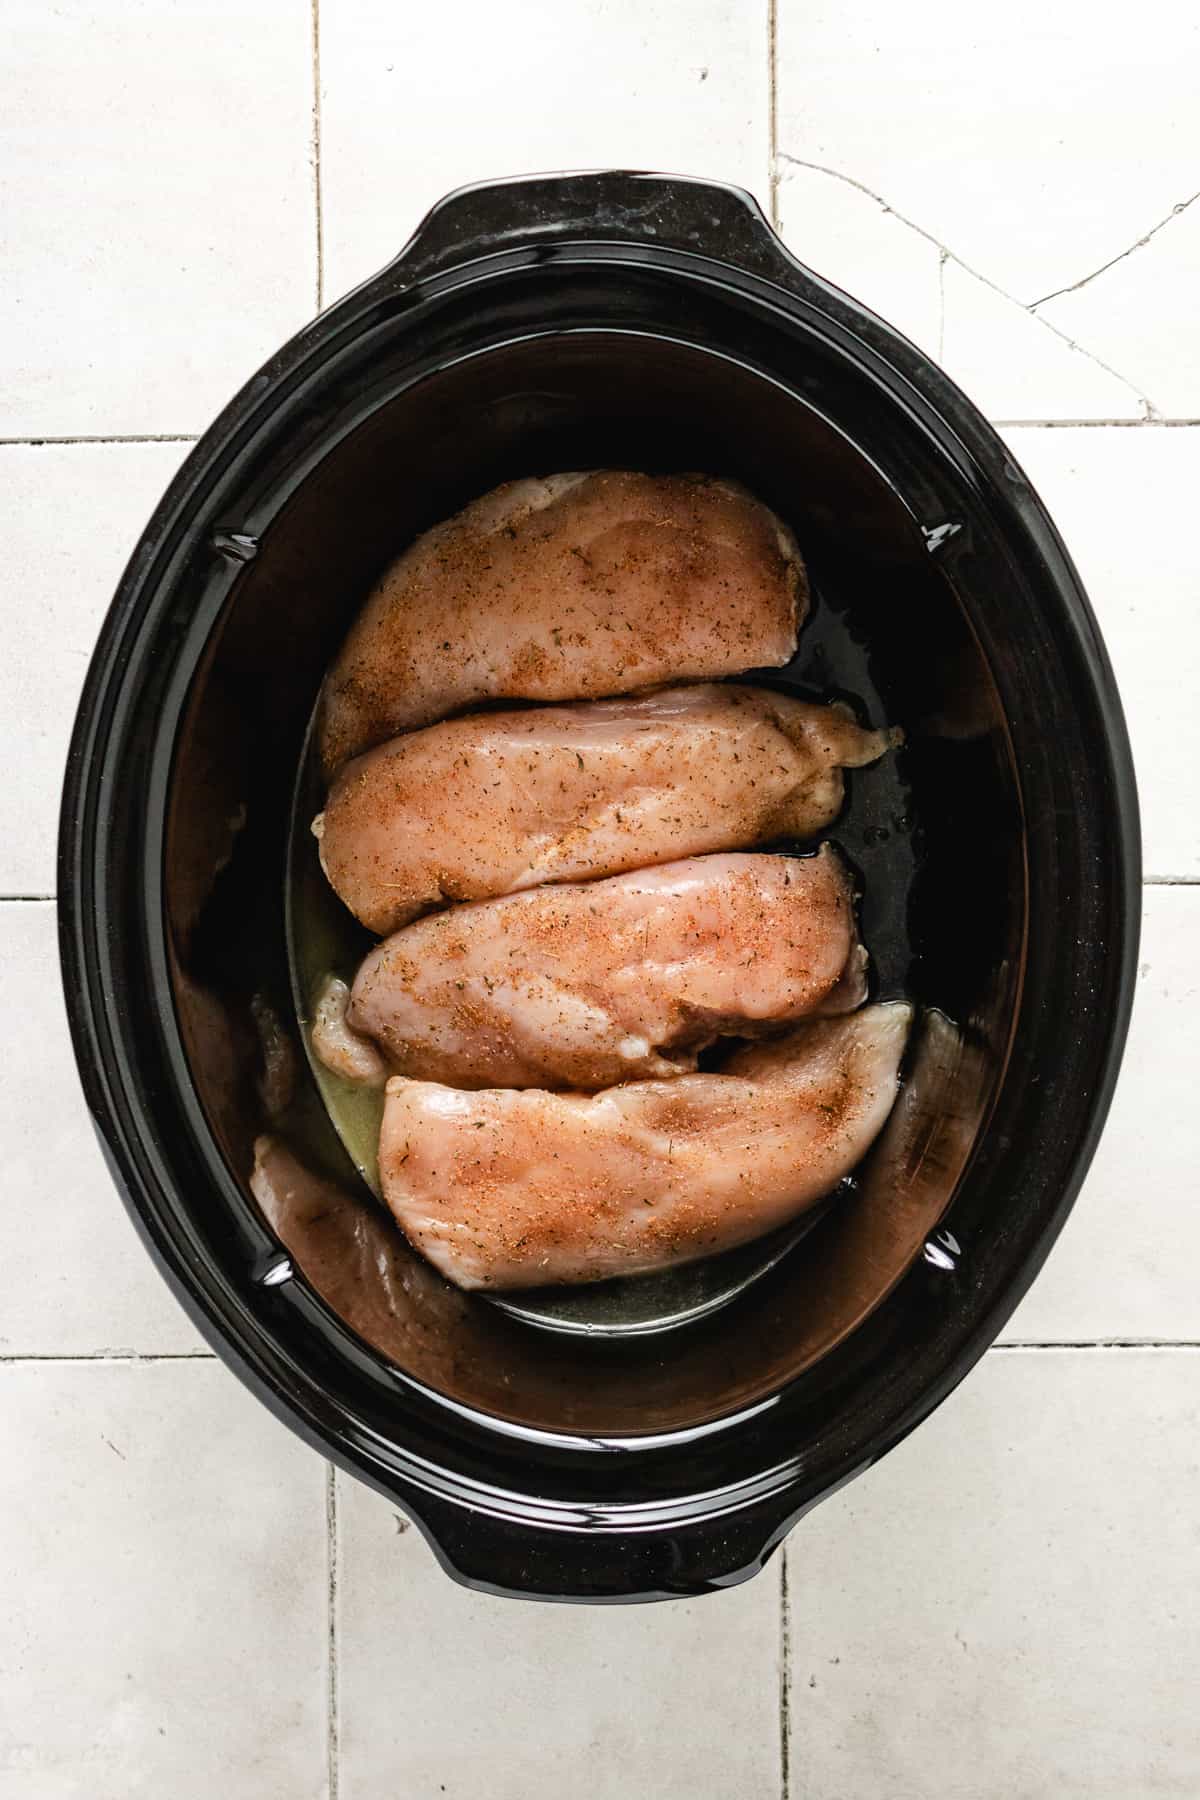 Top down view of raw chicken breasts in a slow cooker.